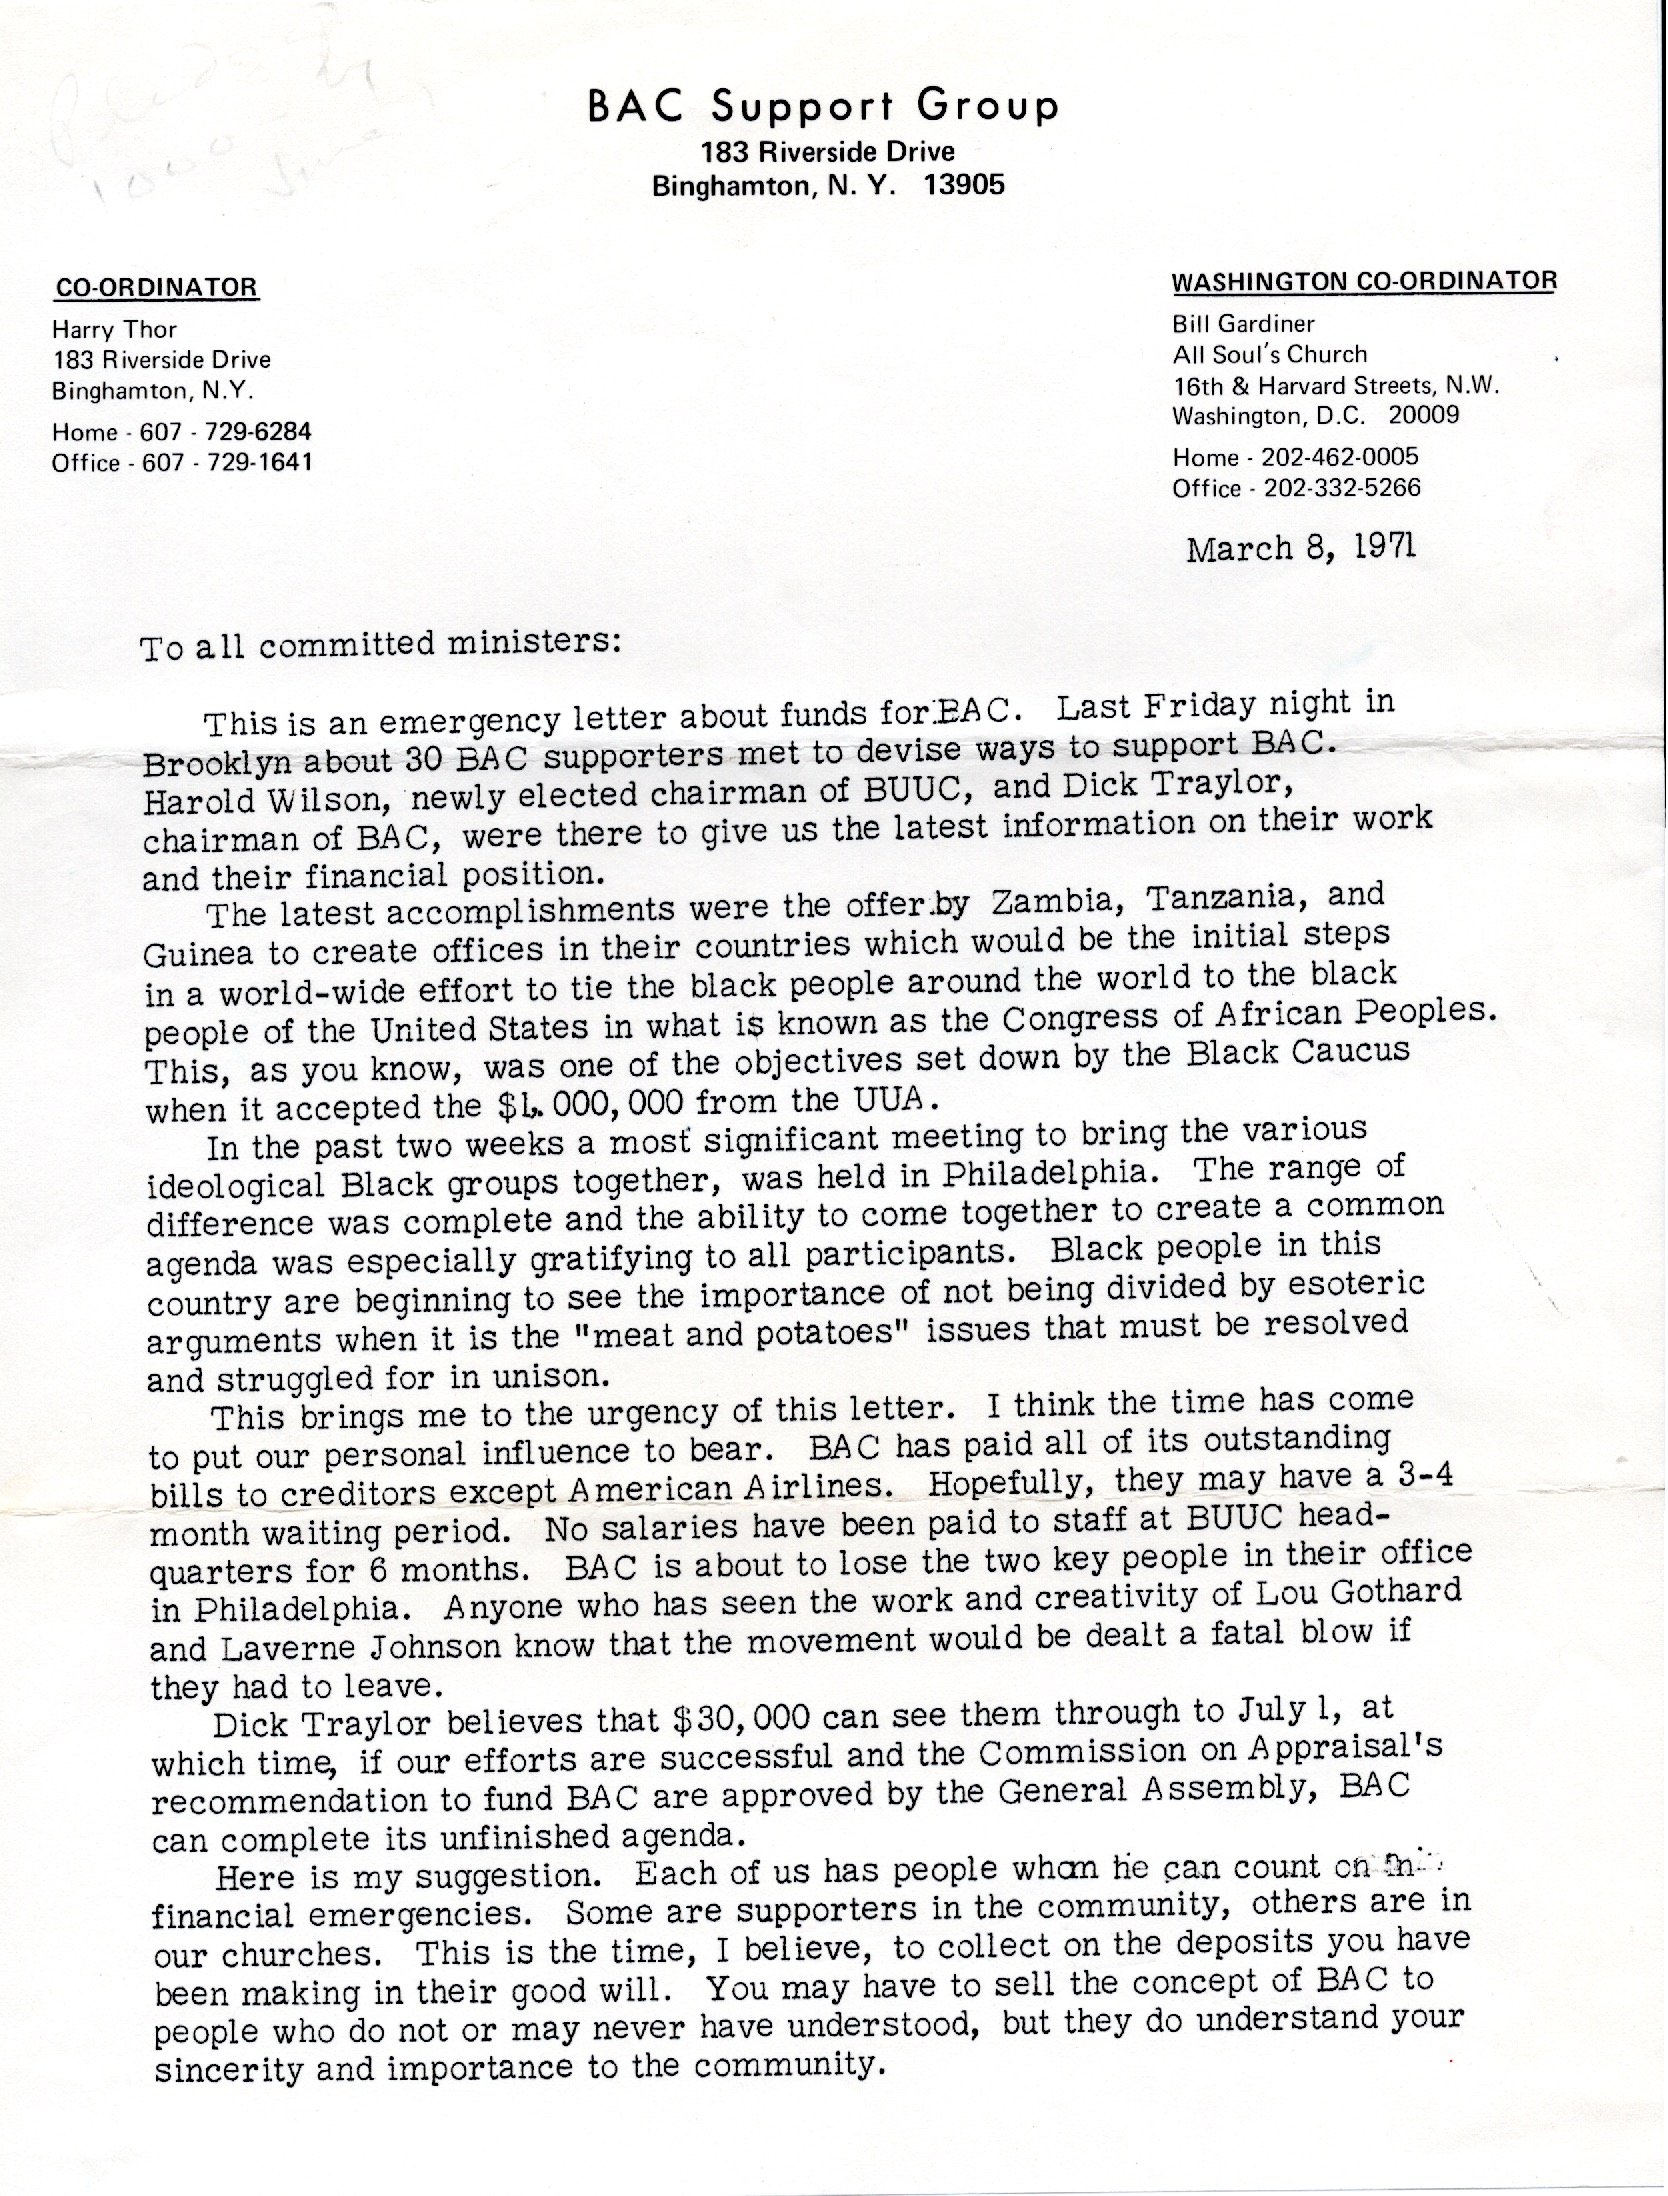 1971.3.8 letter about emergency funds for BAC_0001.jpg